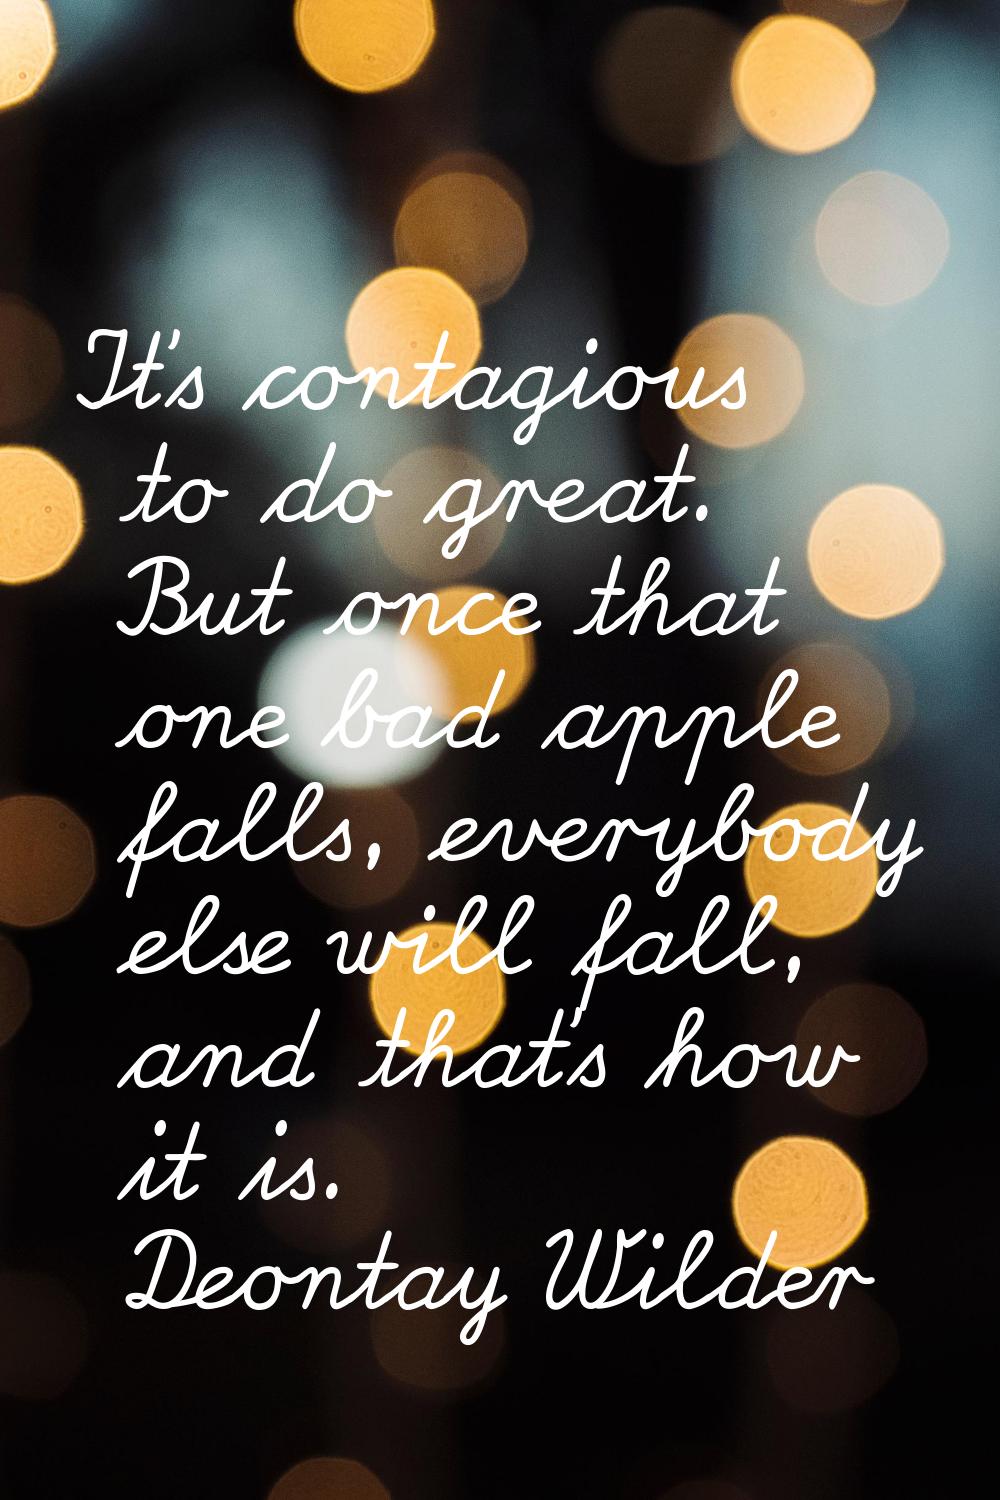 It's contagious to do great. But once that one bad apple falls, everybody else will fall, and that'